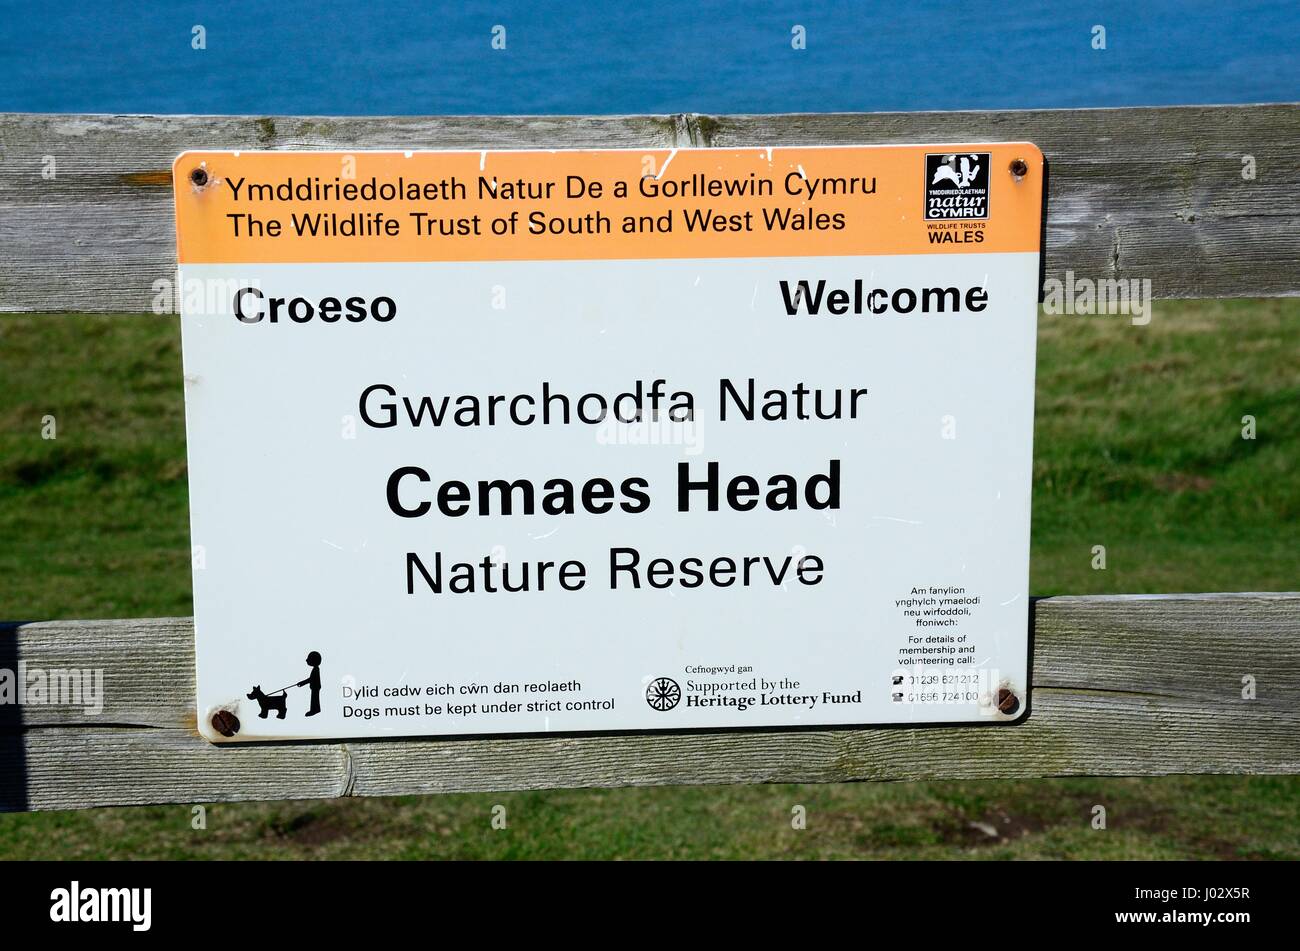 bilingual sign Welcom to Cemaes Head Nature Reserve Croeso i Gwarchodfa Natur Cemaes Head Wildlife Trust of South and West Wales Pembrokeshire Wales Stock Photo